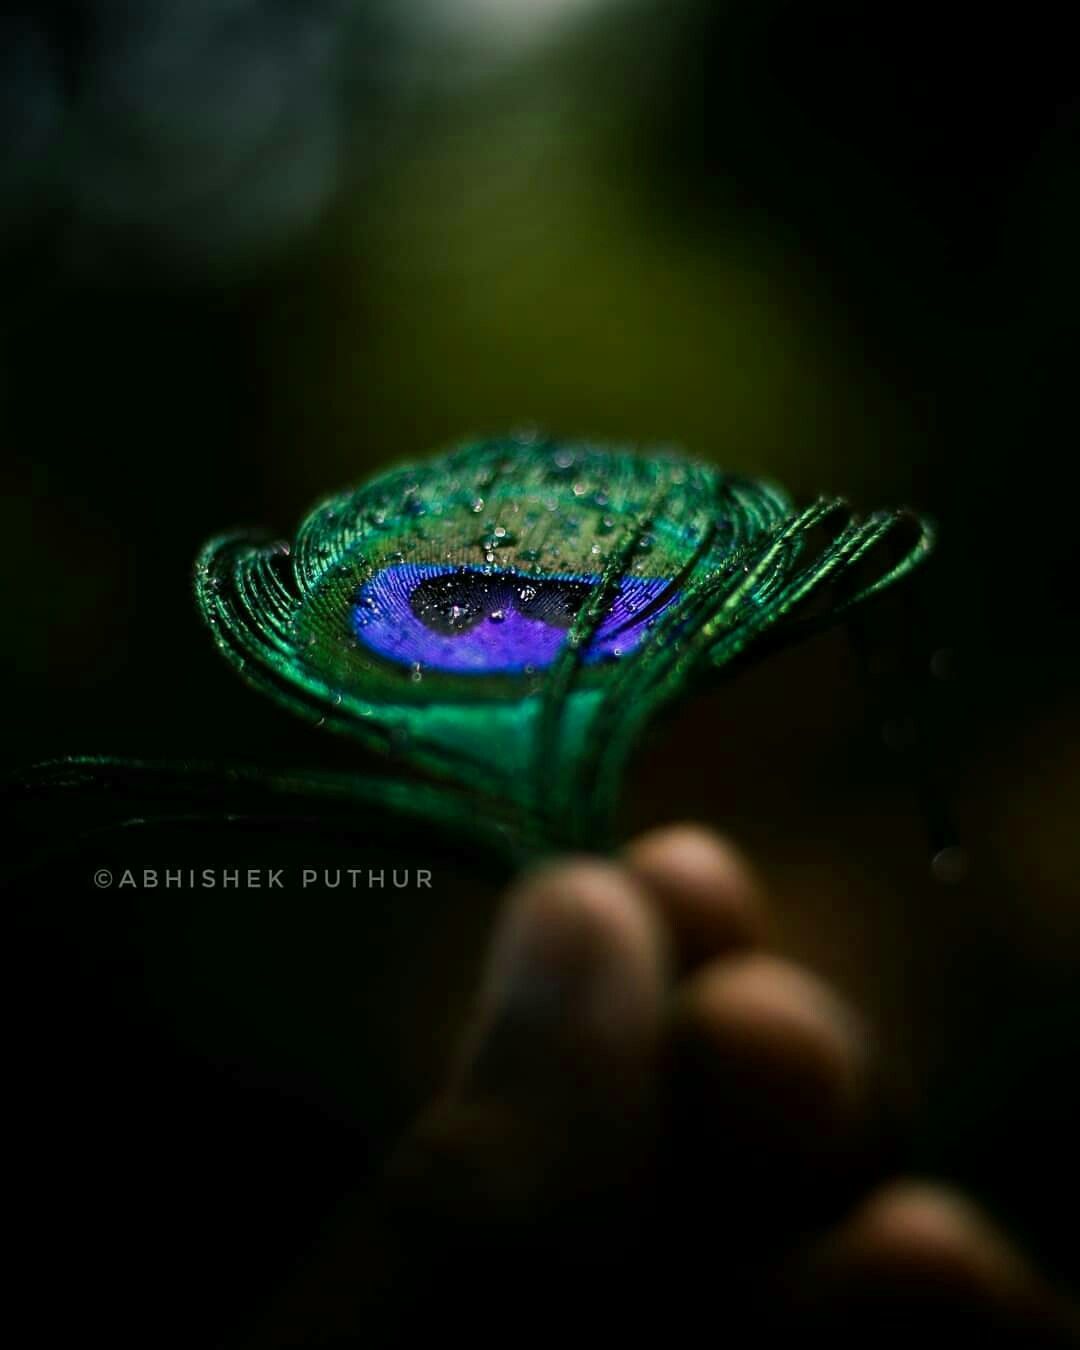 Eye of the Peacock. Lord krishna image, Peacock feather art, Dream photography